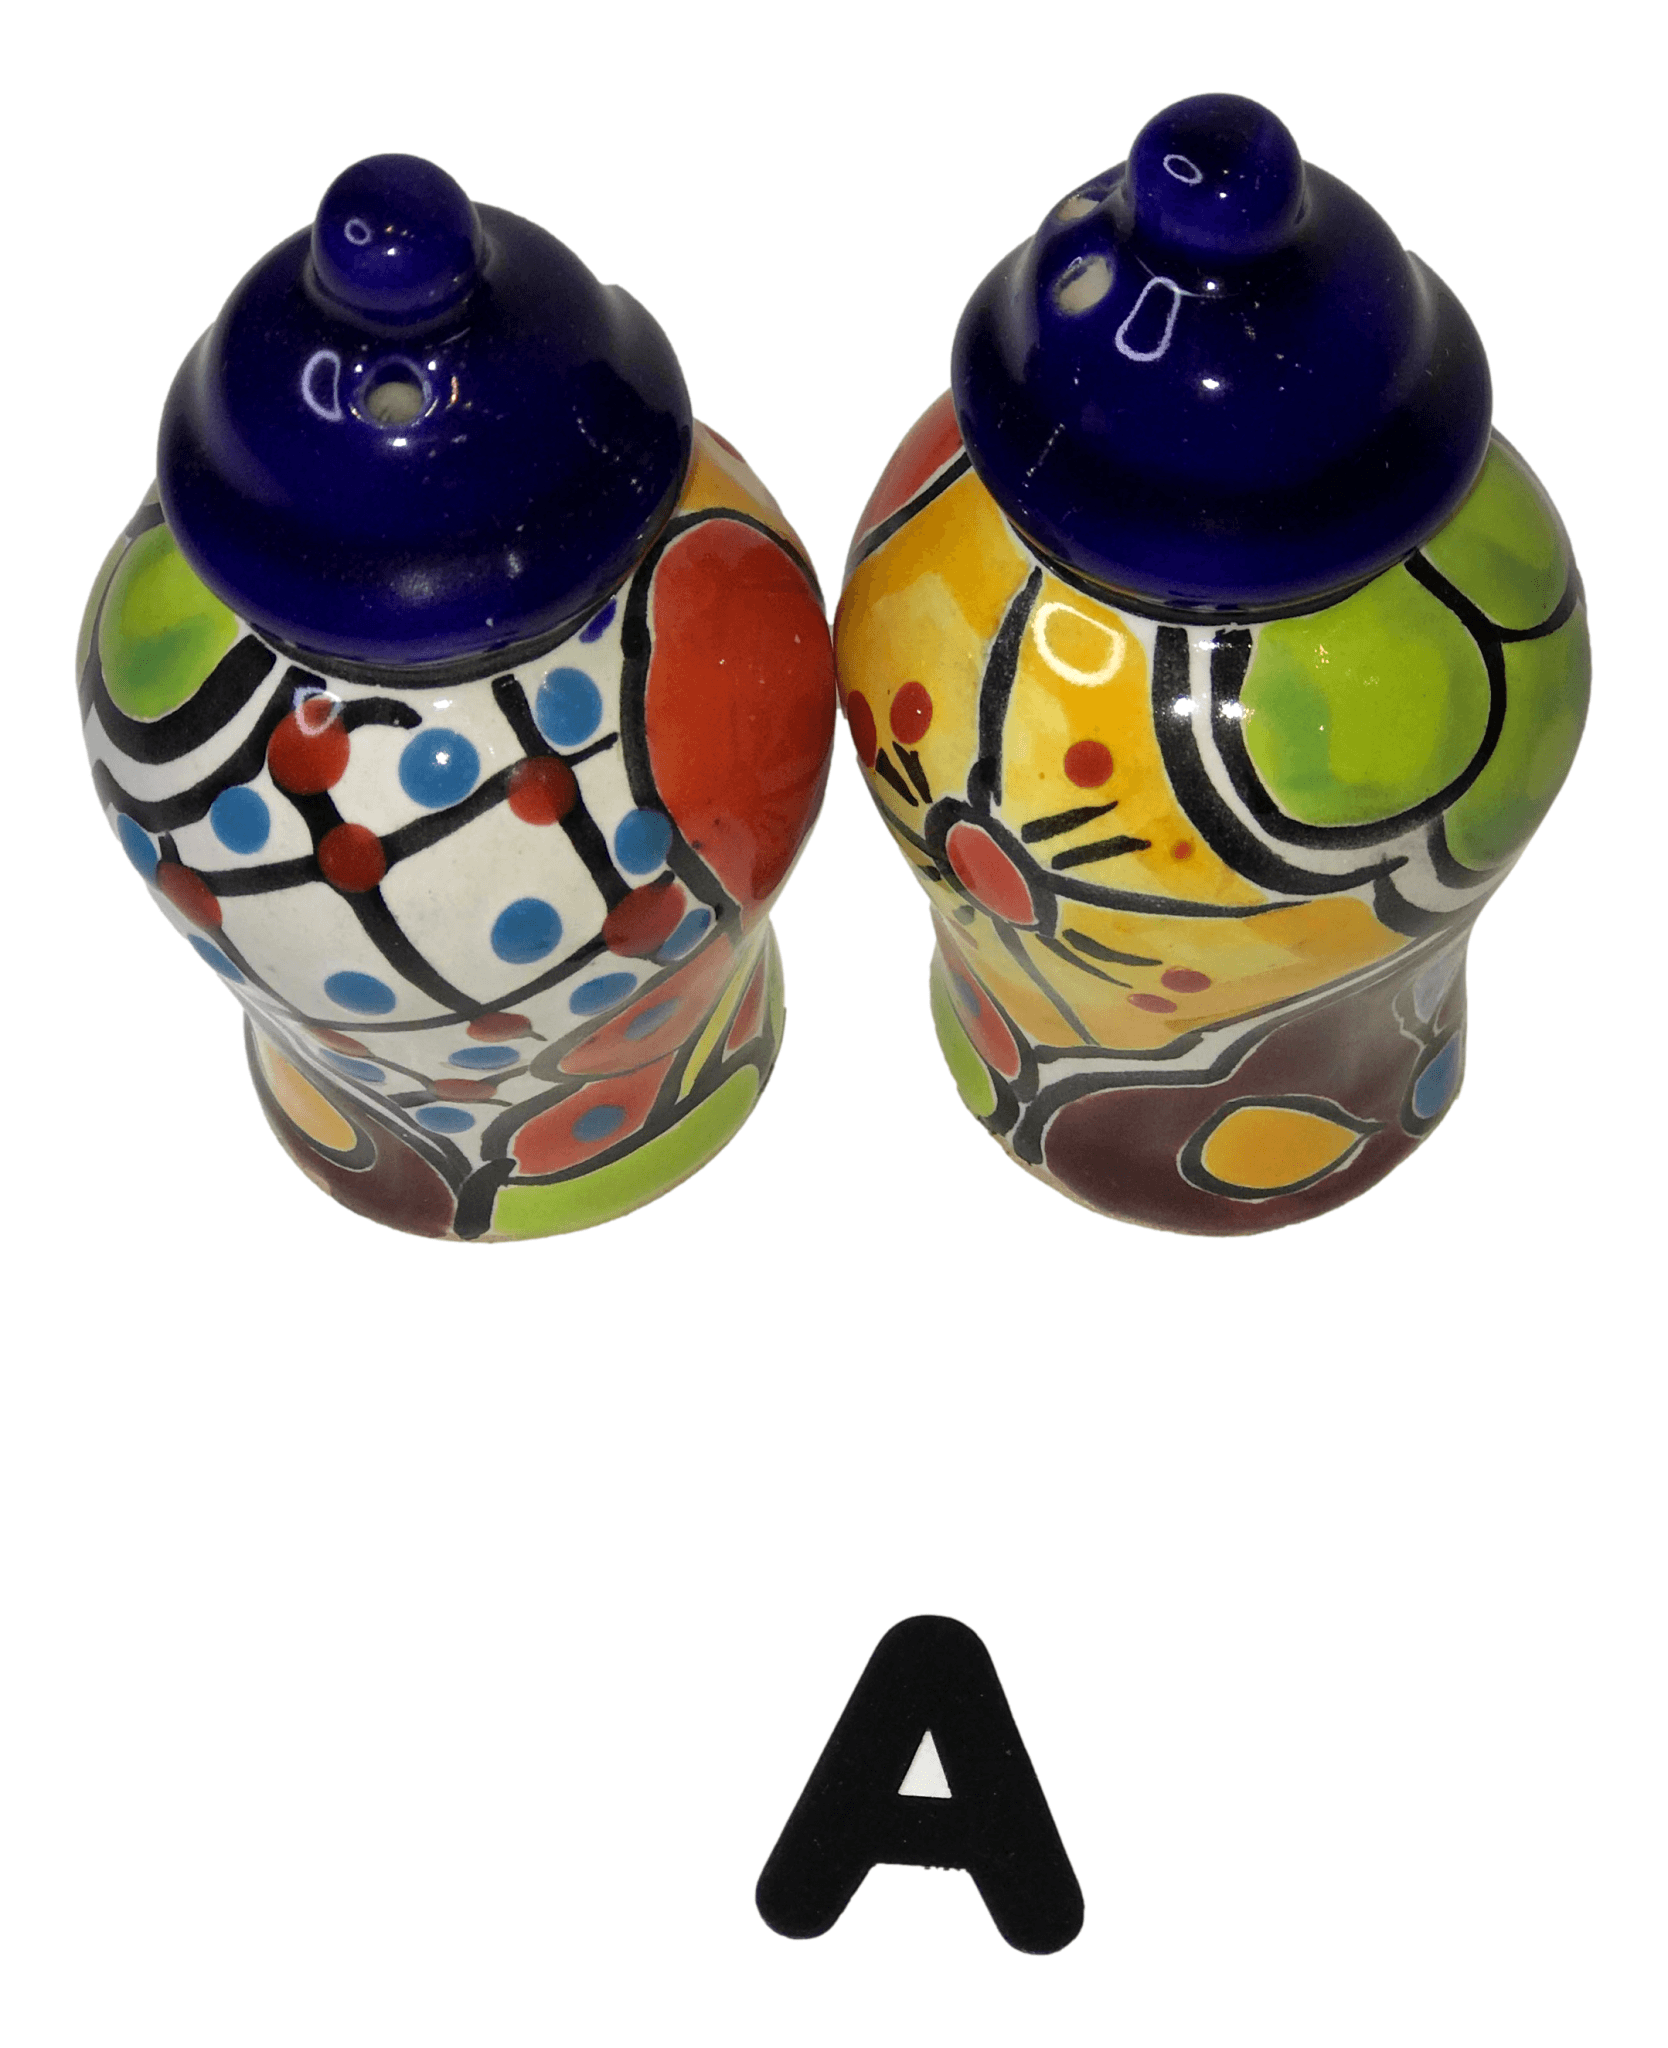 Talavera Dishware Square Earthenware Jar Salt and Pepper Shaker Set of 2 Handcrafted By Silled Mexican Artisans H:4 inches - Ysleta Mission Gift Shop- VOTED 2022 El Paso's Best Gift Shop